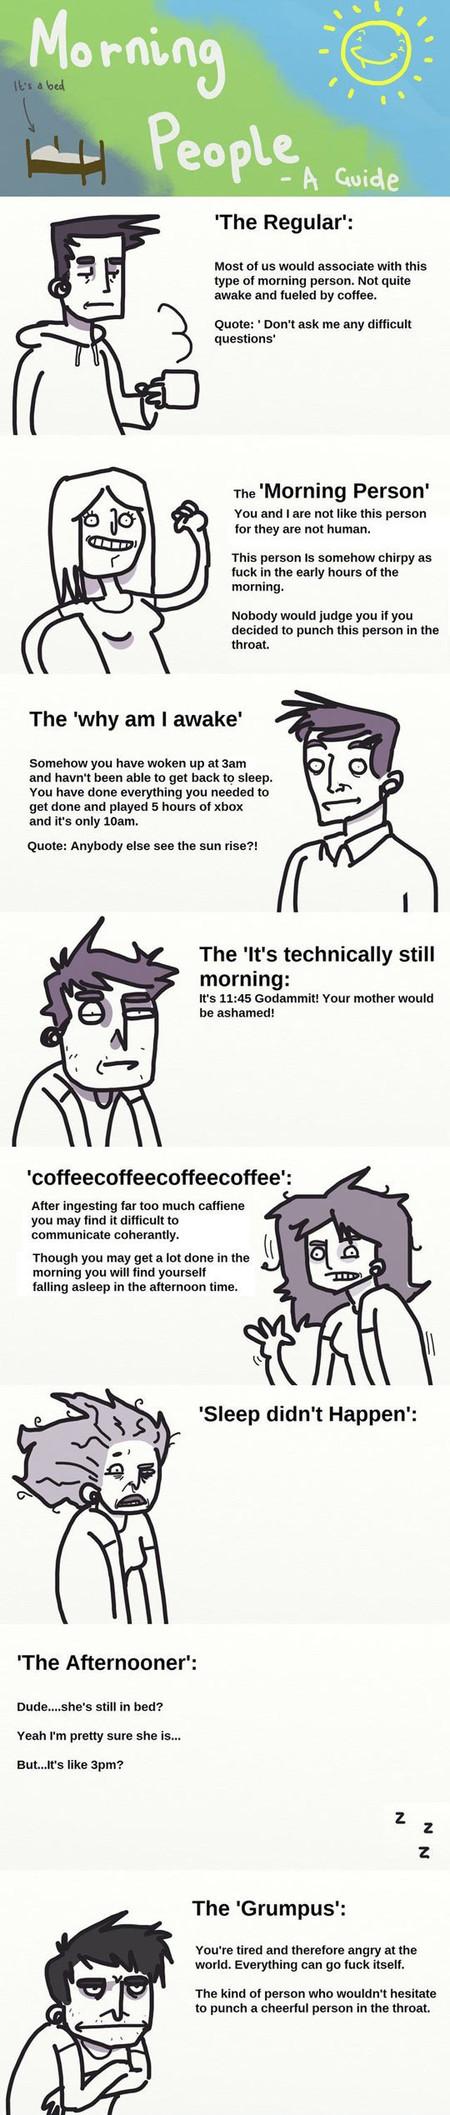 Types Of Morning People